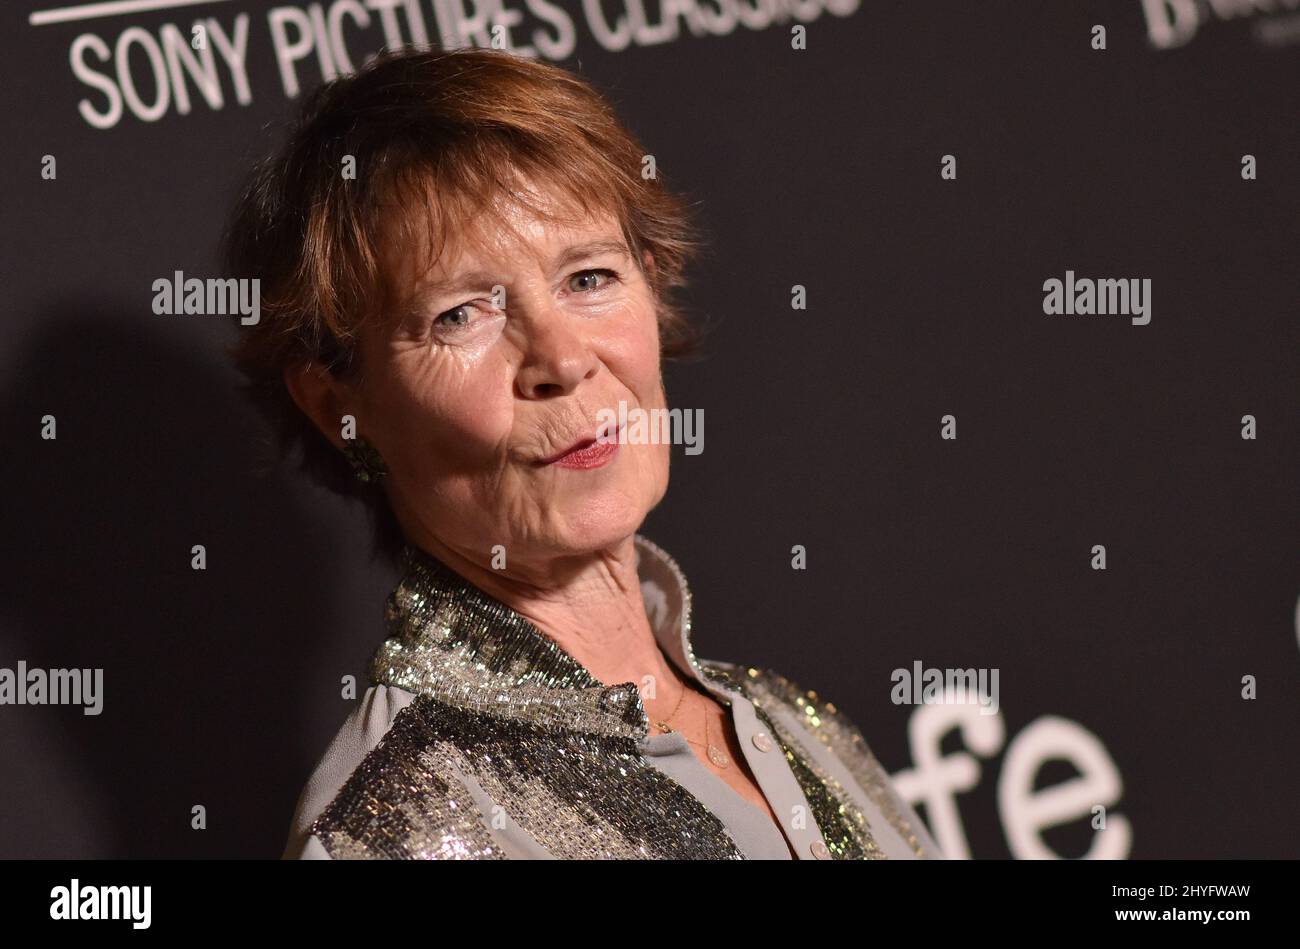 Calendar girls celia imrie hi-res stock photography and images - Alamy